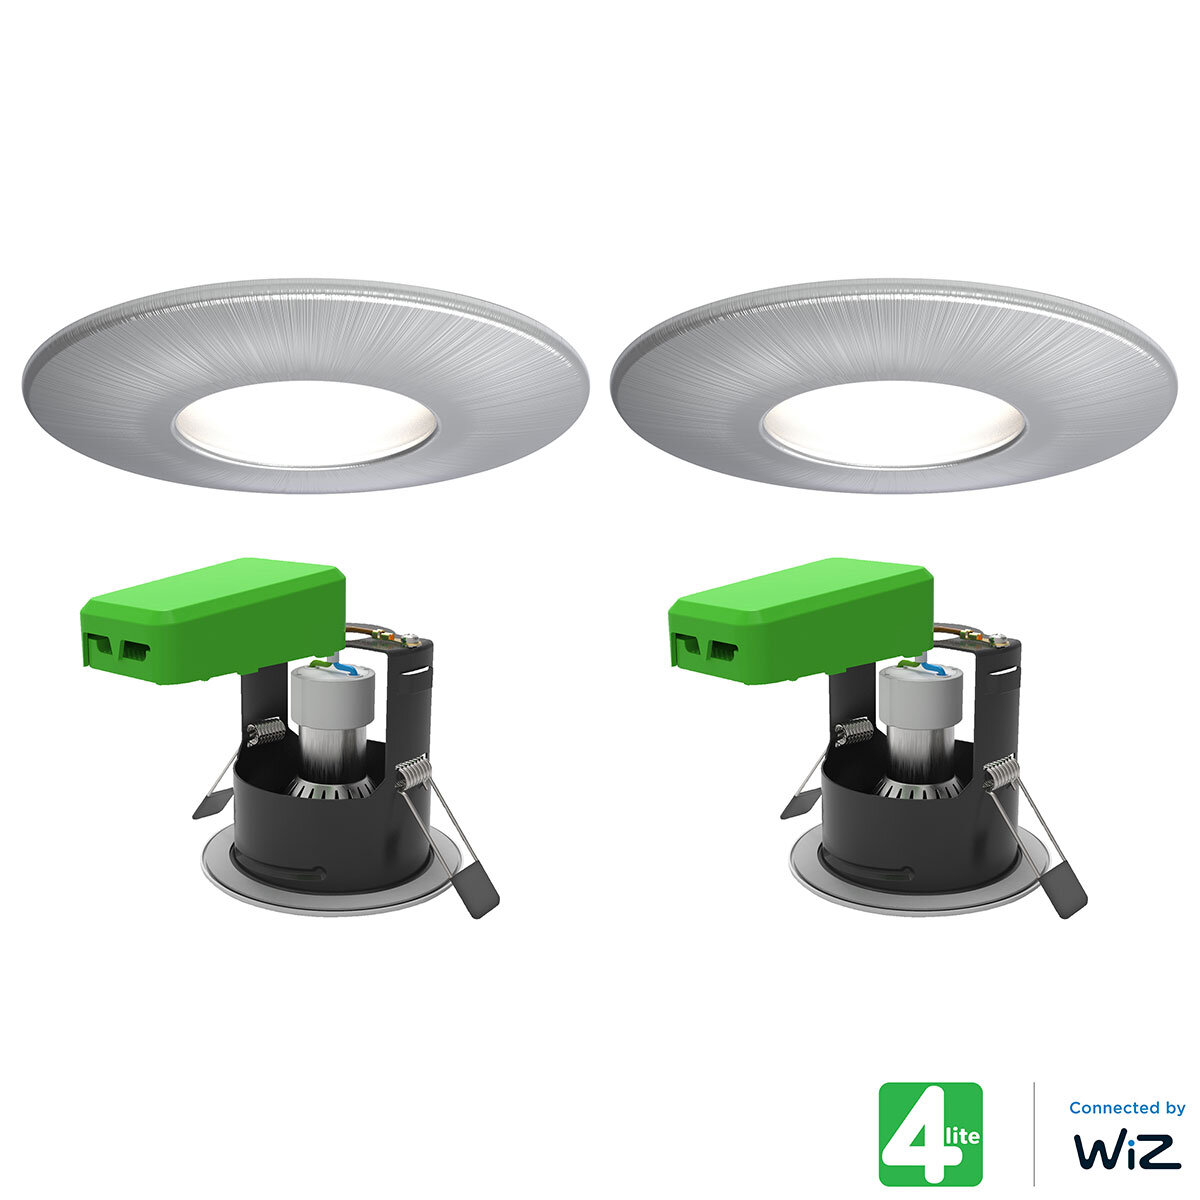 4lite WiZ Connected LED IP65 Fire Rated Downlight, Pack of 2, in Satin Chrome